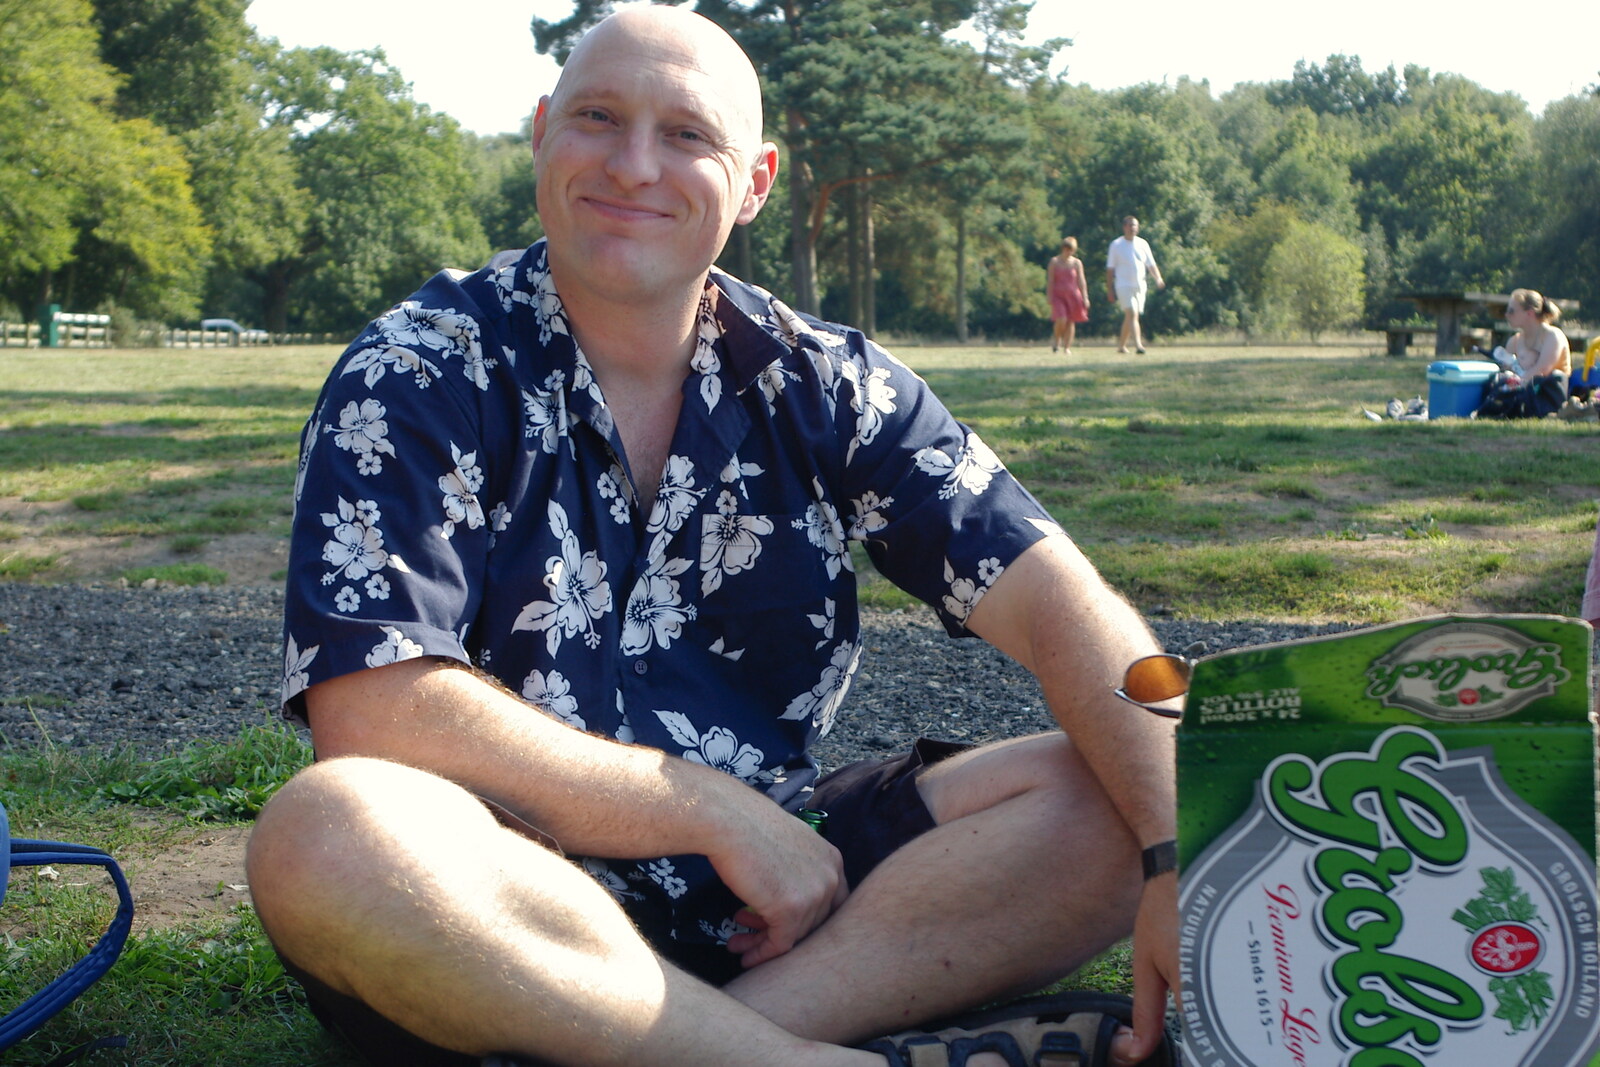 Guv with his trademark case of Grolsch from Picnic at the Heath, Knettishall, Norfolk - 4th September 2005